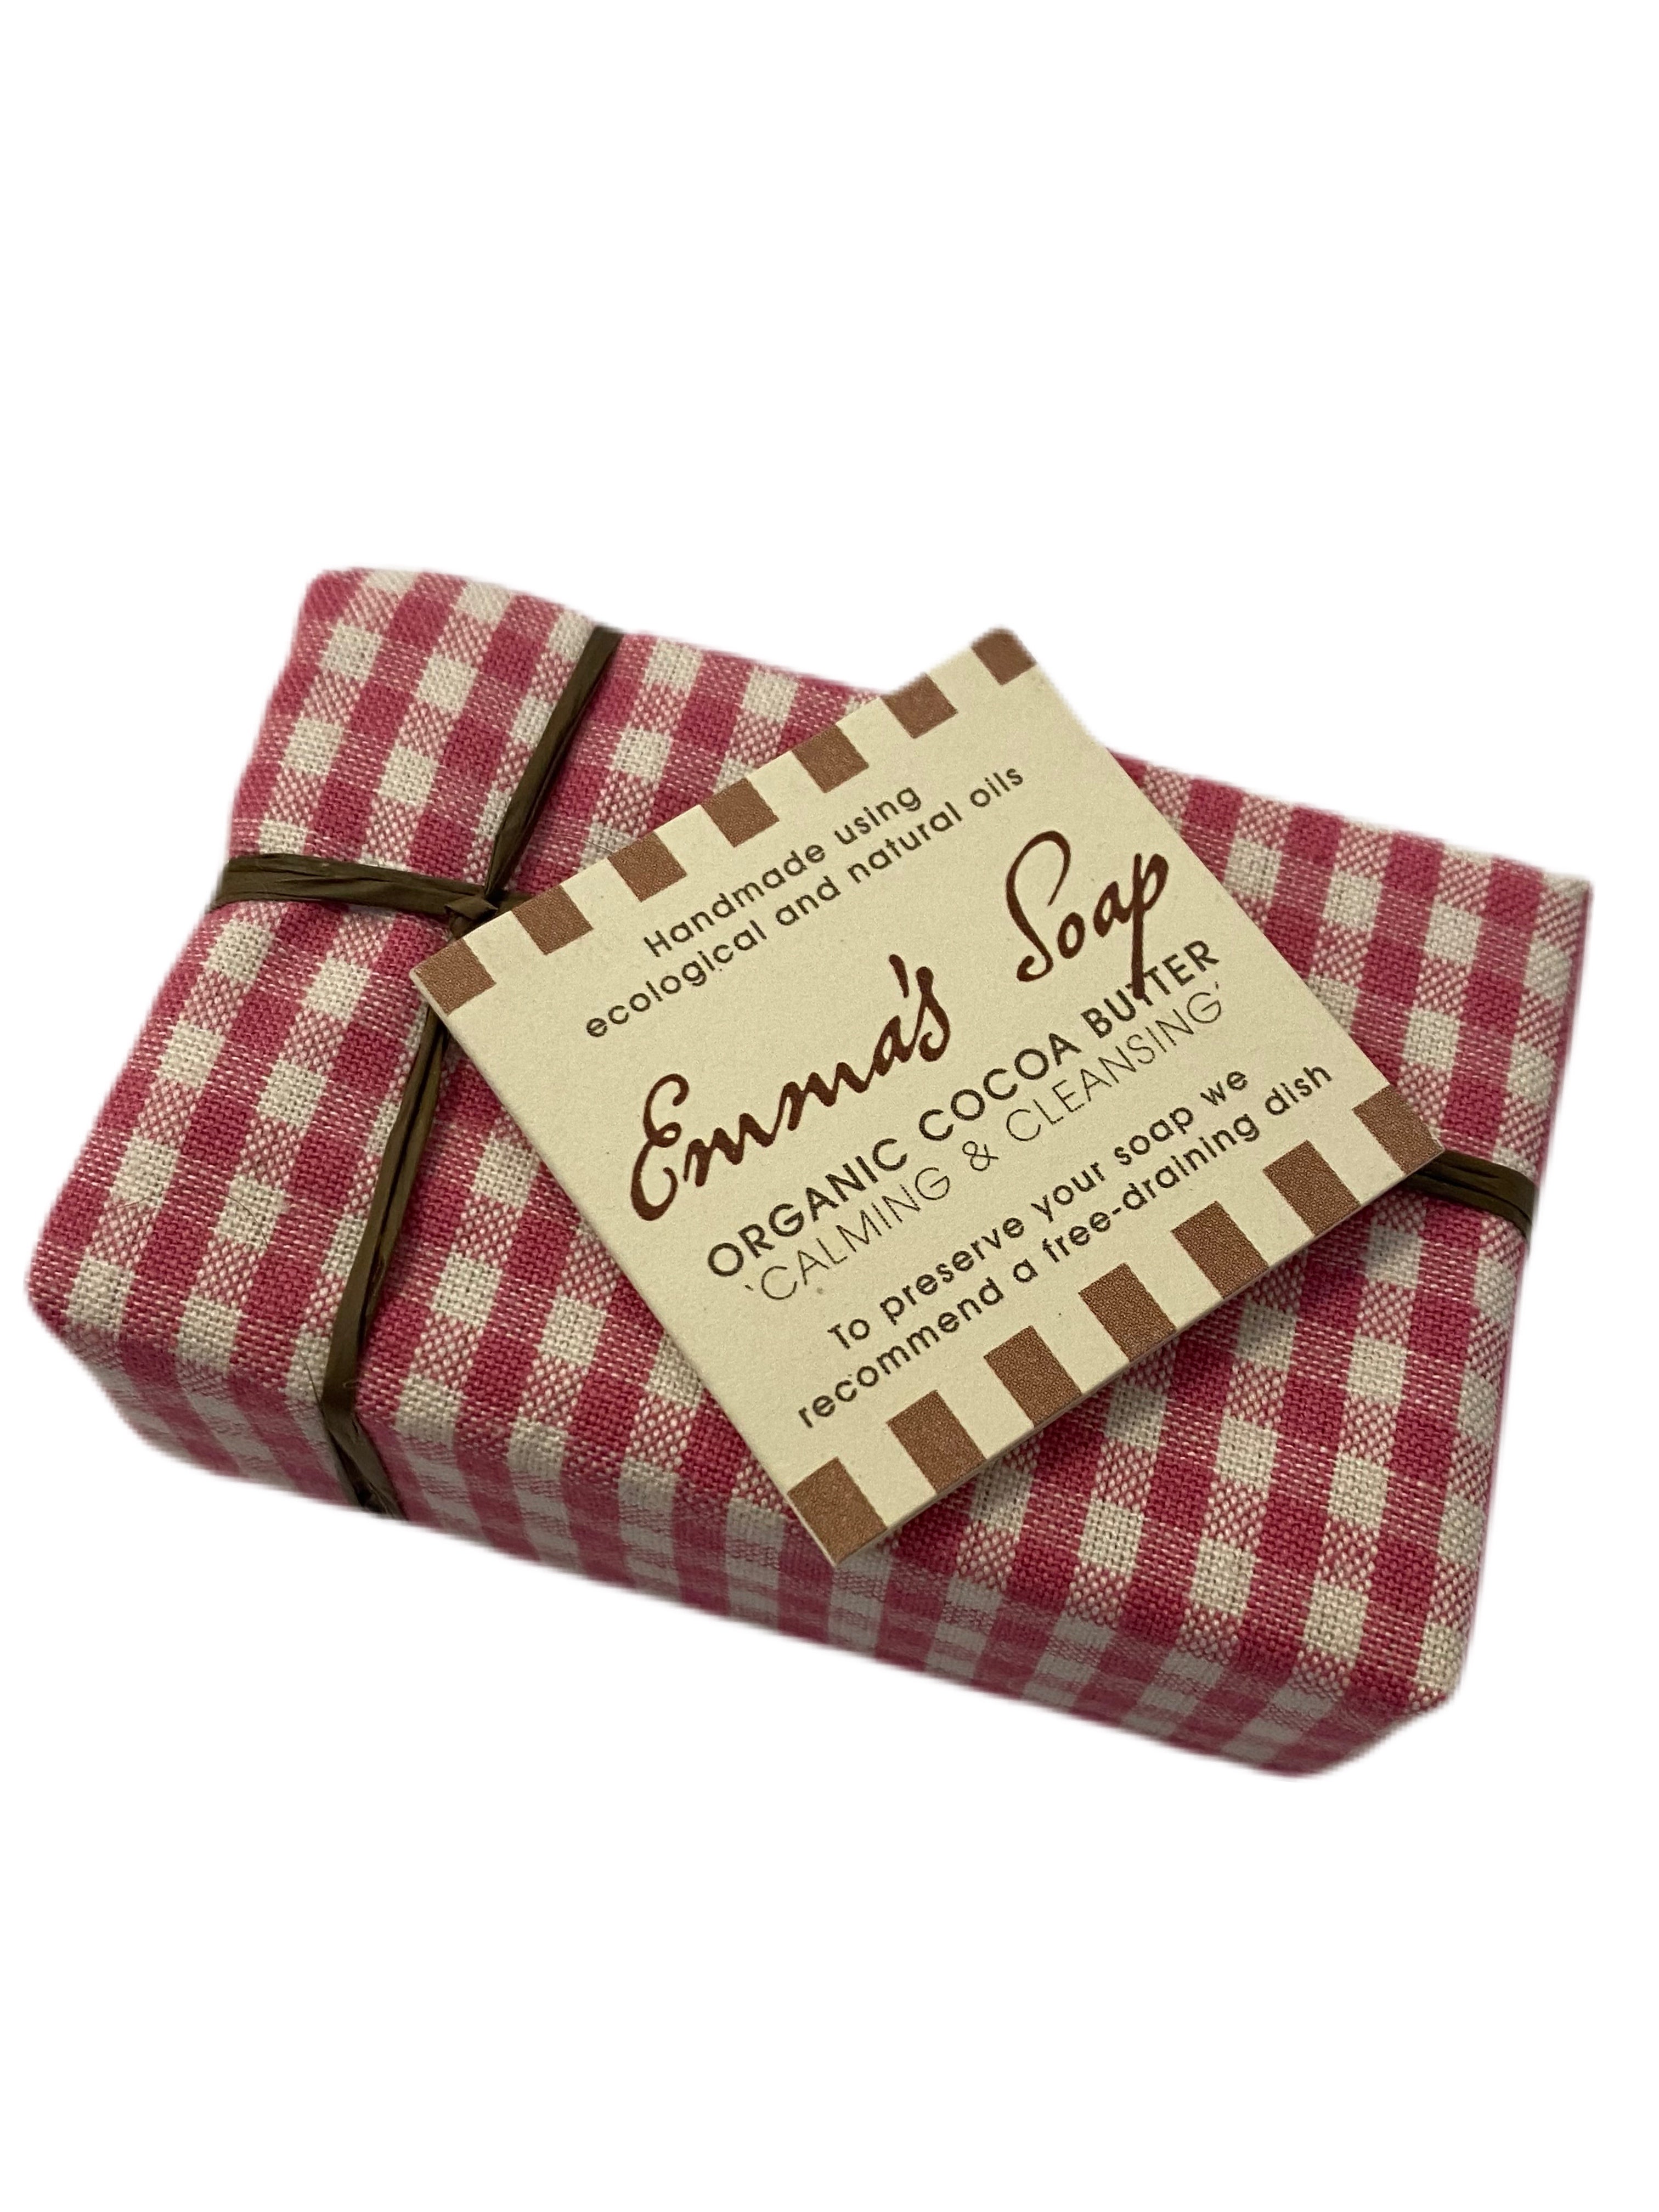 Emma's Soap - Organic Cocoa Butter Calming & Cleansing Soap Bar - Kate's Cupboard